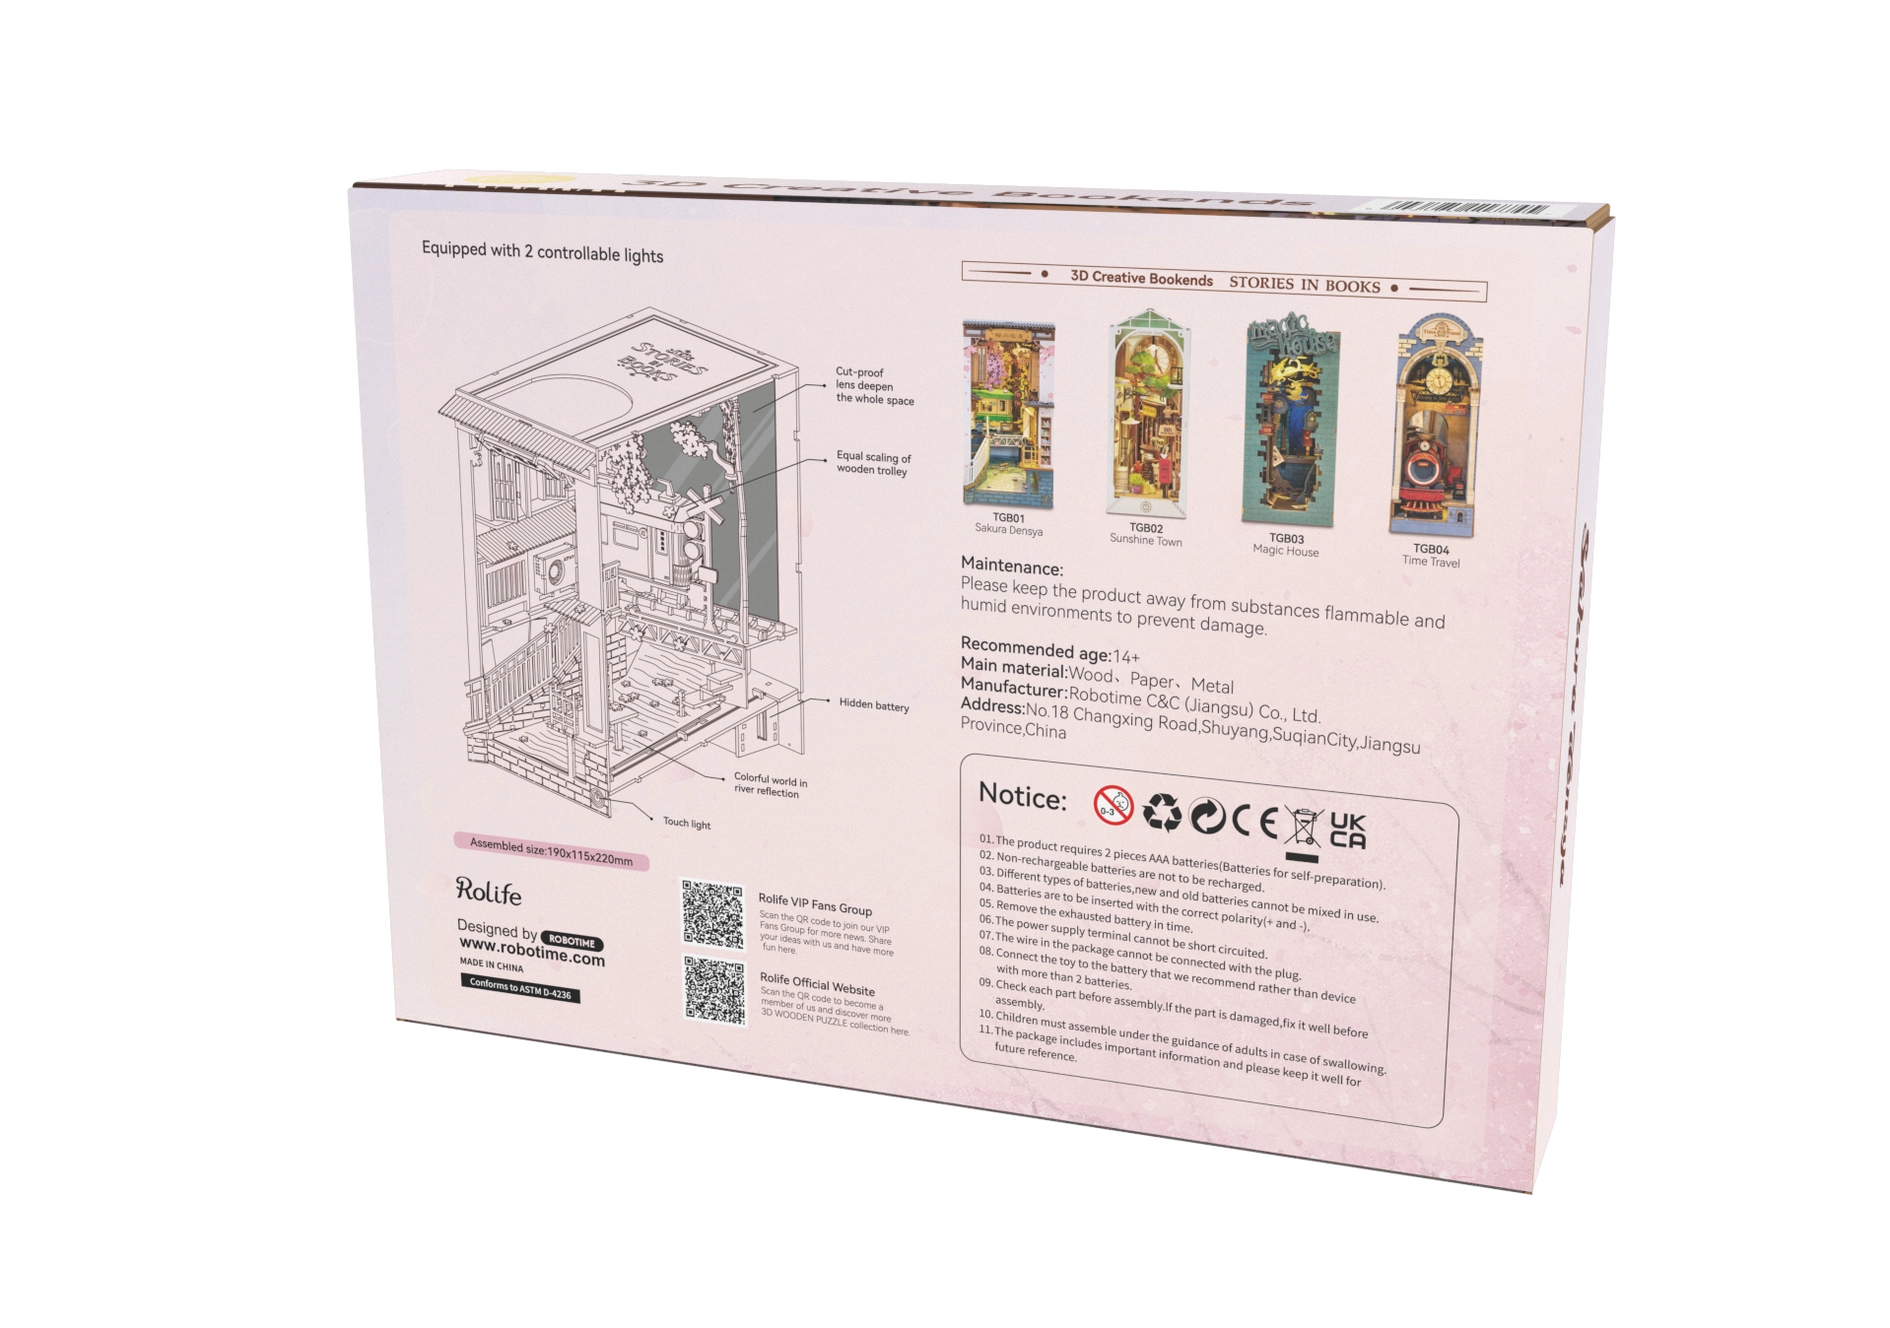 A blind box art toy: Book Nook Kits For Adults - Sakura Tram. Image shows a box with instructions, a building sketch, and a QR code. Dimensions: 9.4 x 3.9 x 7.4 in.